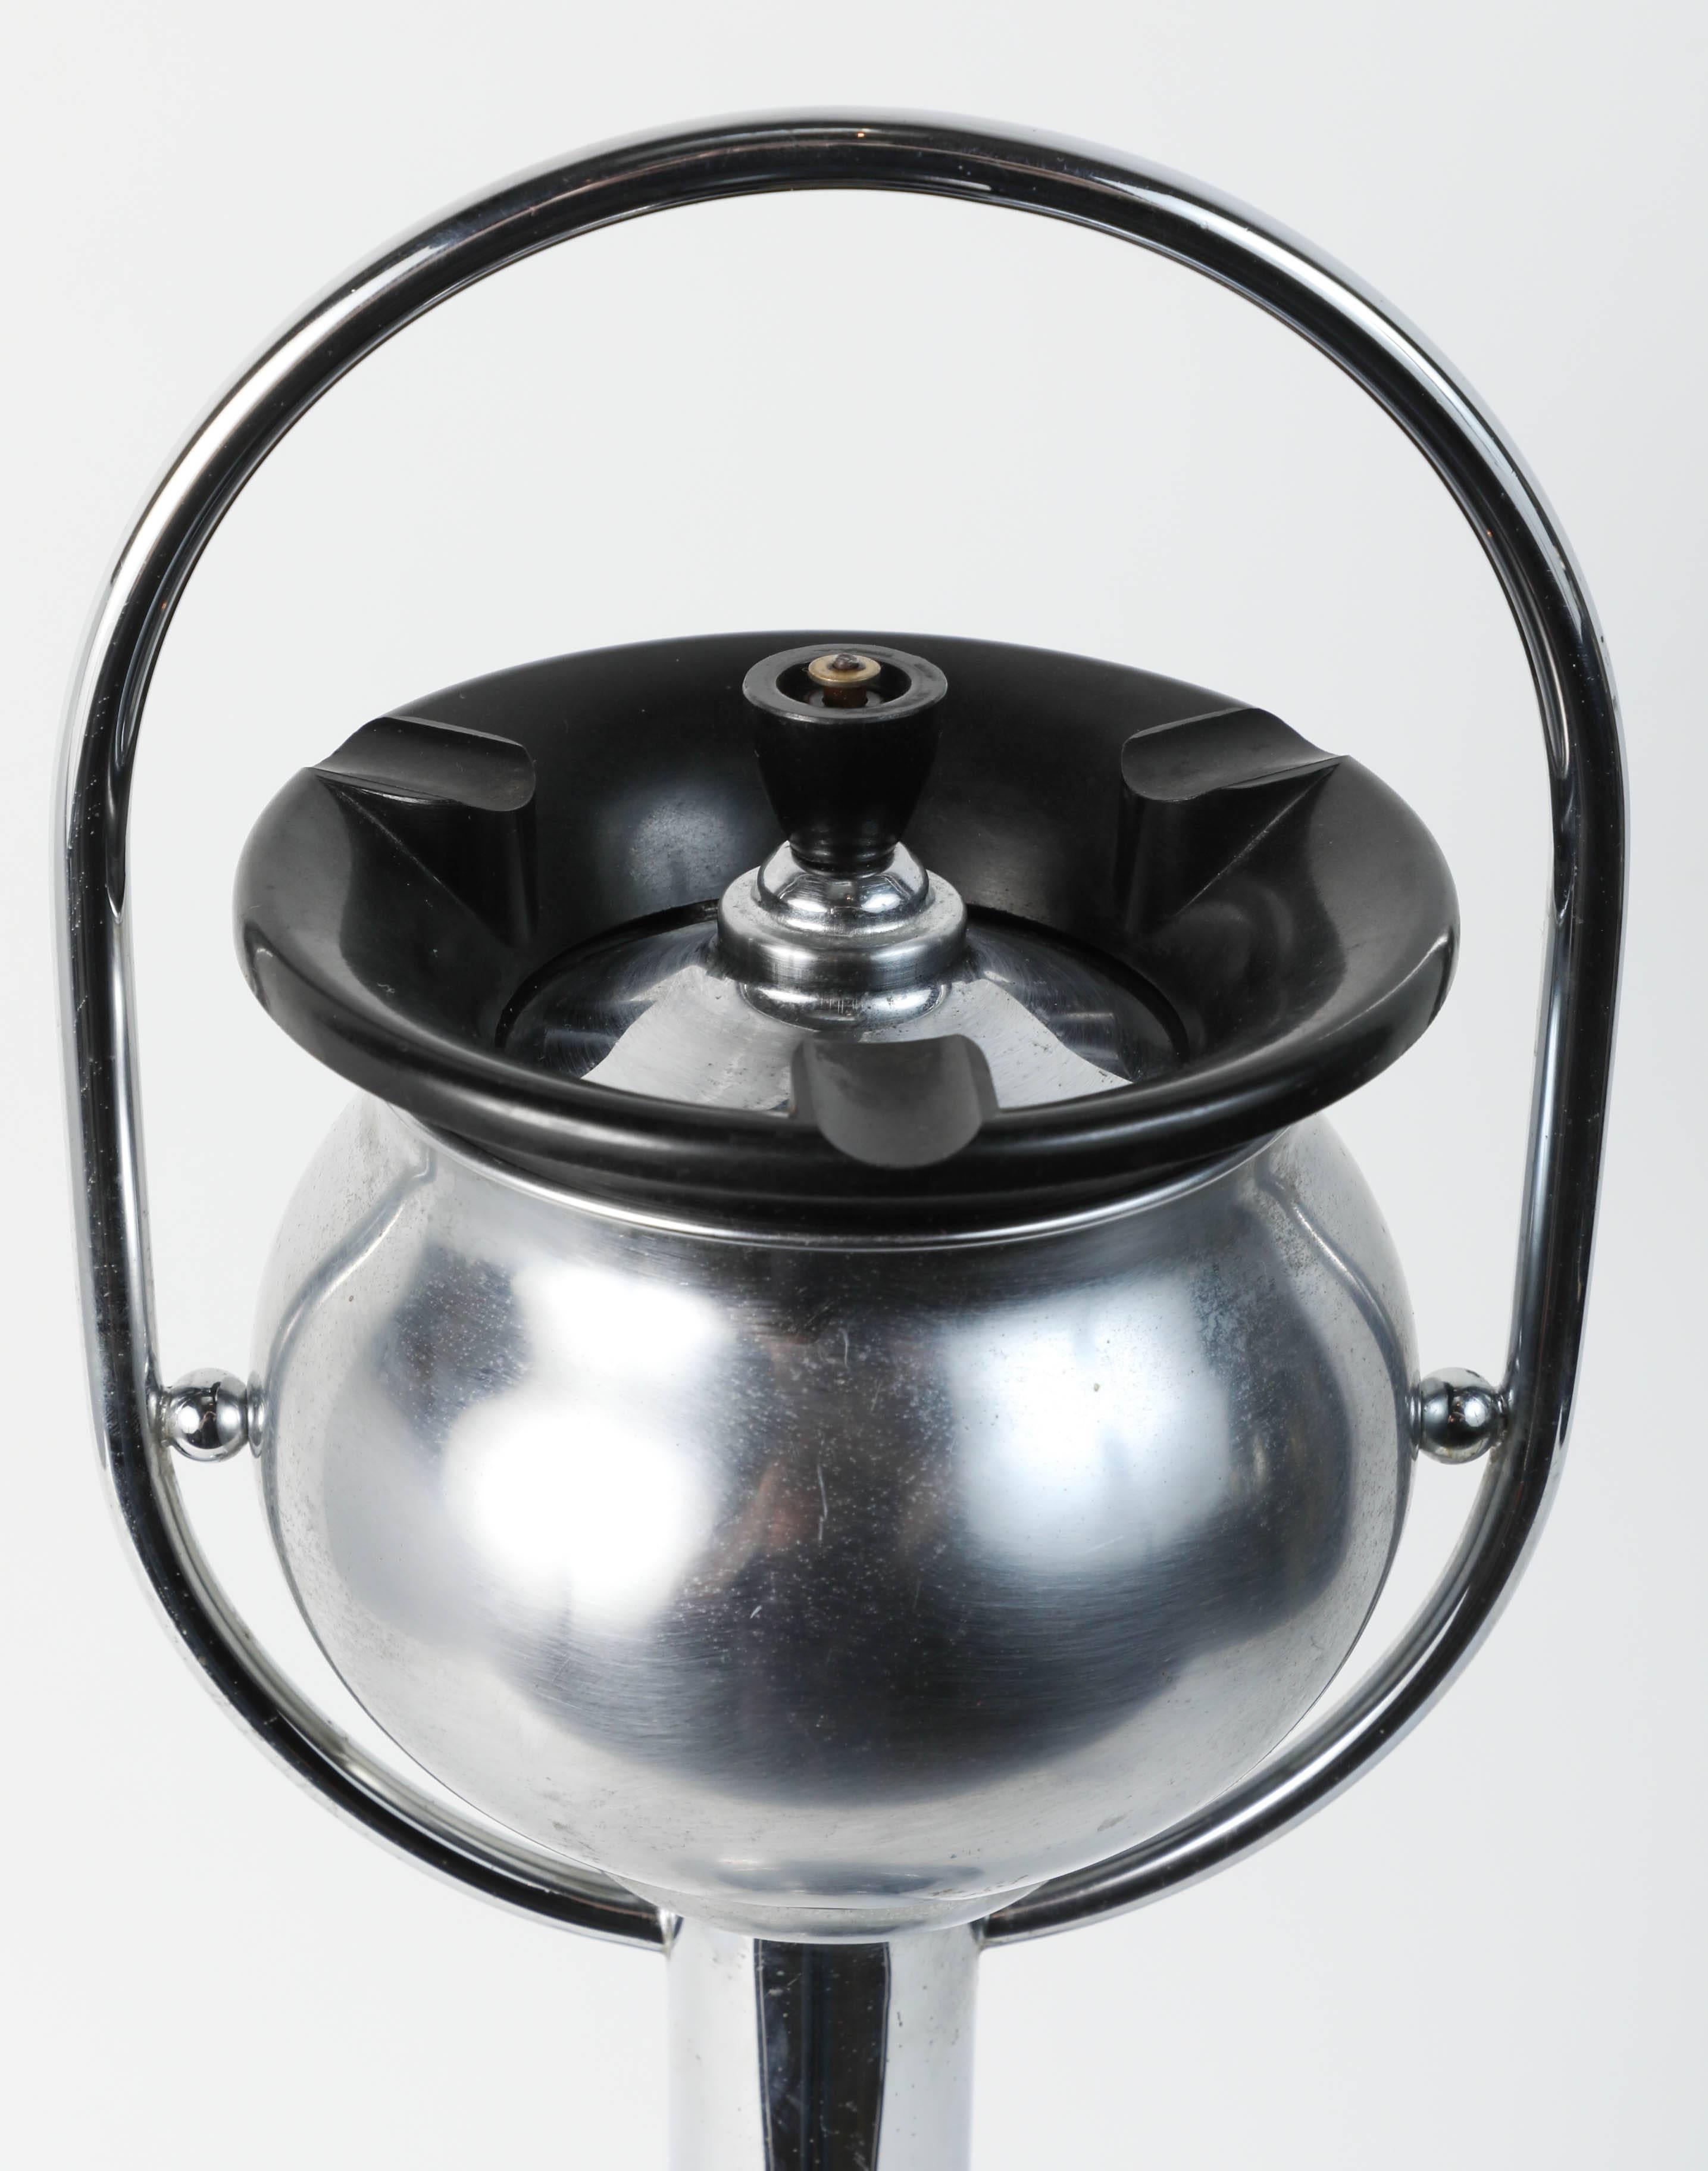 Fantastic chrome smoking stand ashtray in the style of designer Wolfgang Hoffman. 
Classic American Art Deco design. 
Top black Bakelite ring cigarette stubber. 
The base is weighted.
This piece is in remarkable original condition.
The ashtray